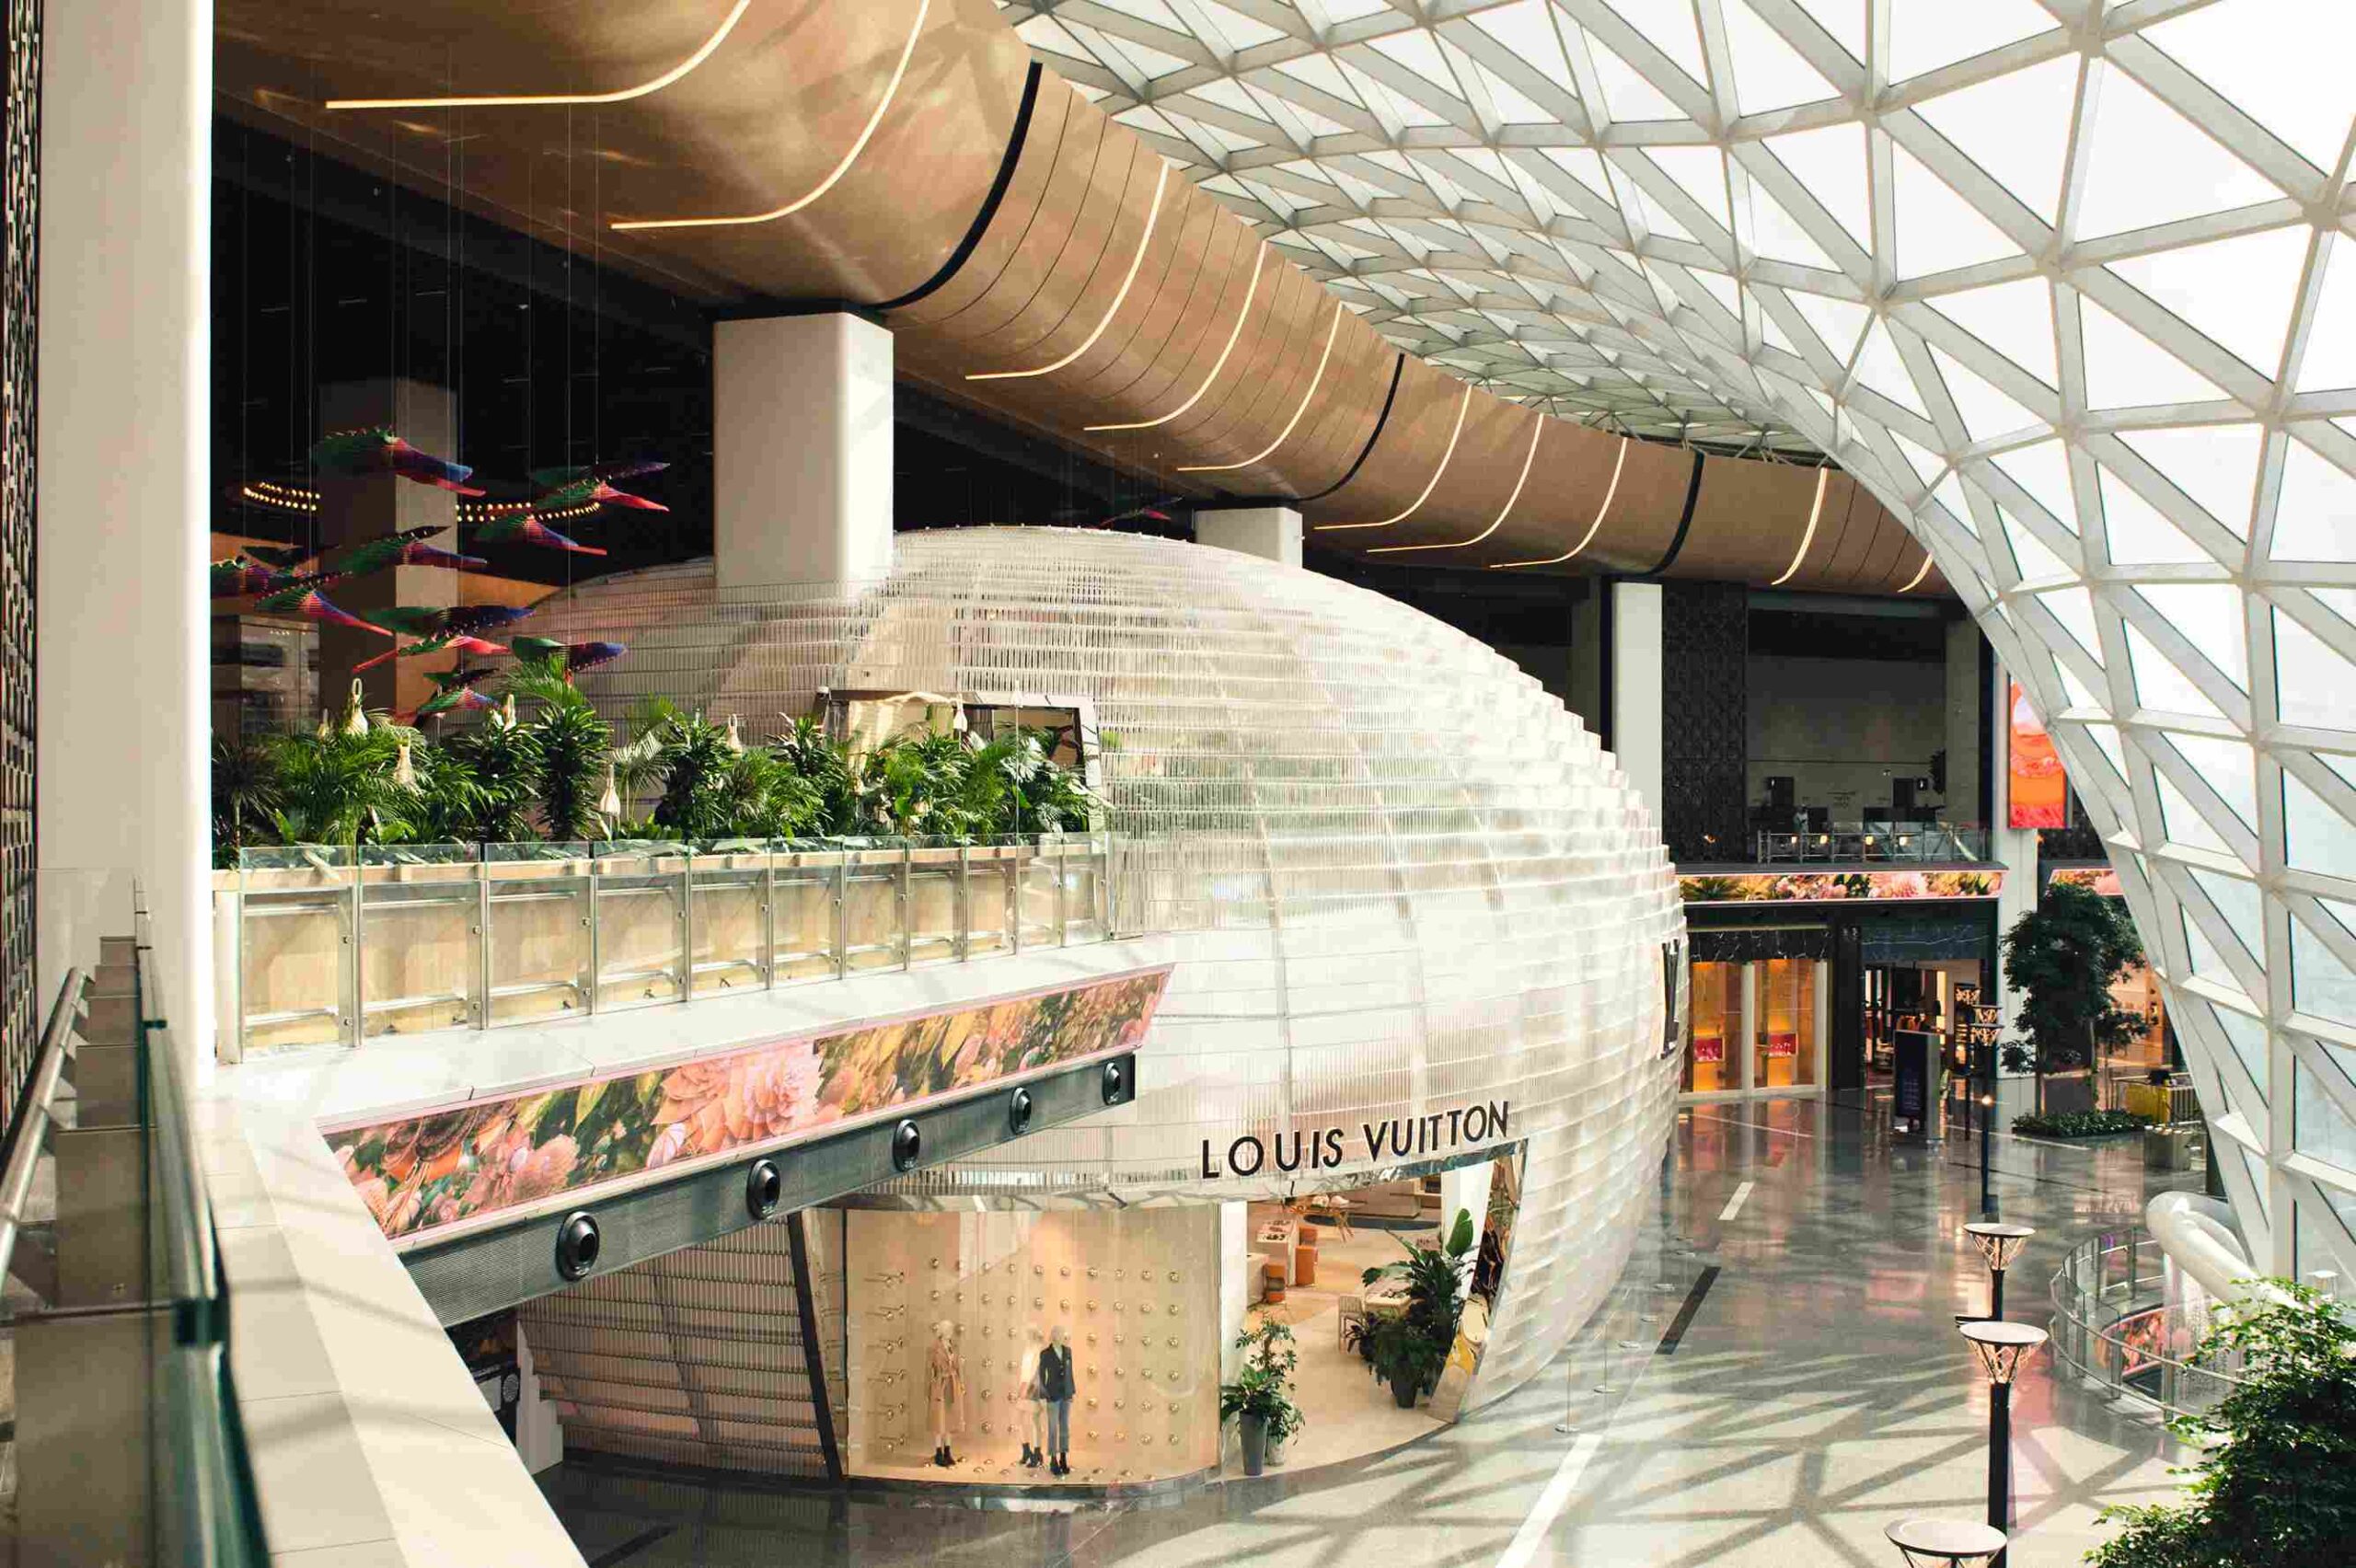 Louis Vuitton opens cultural and culinary destination dubbed 'LV